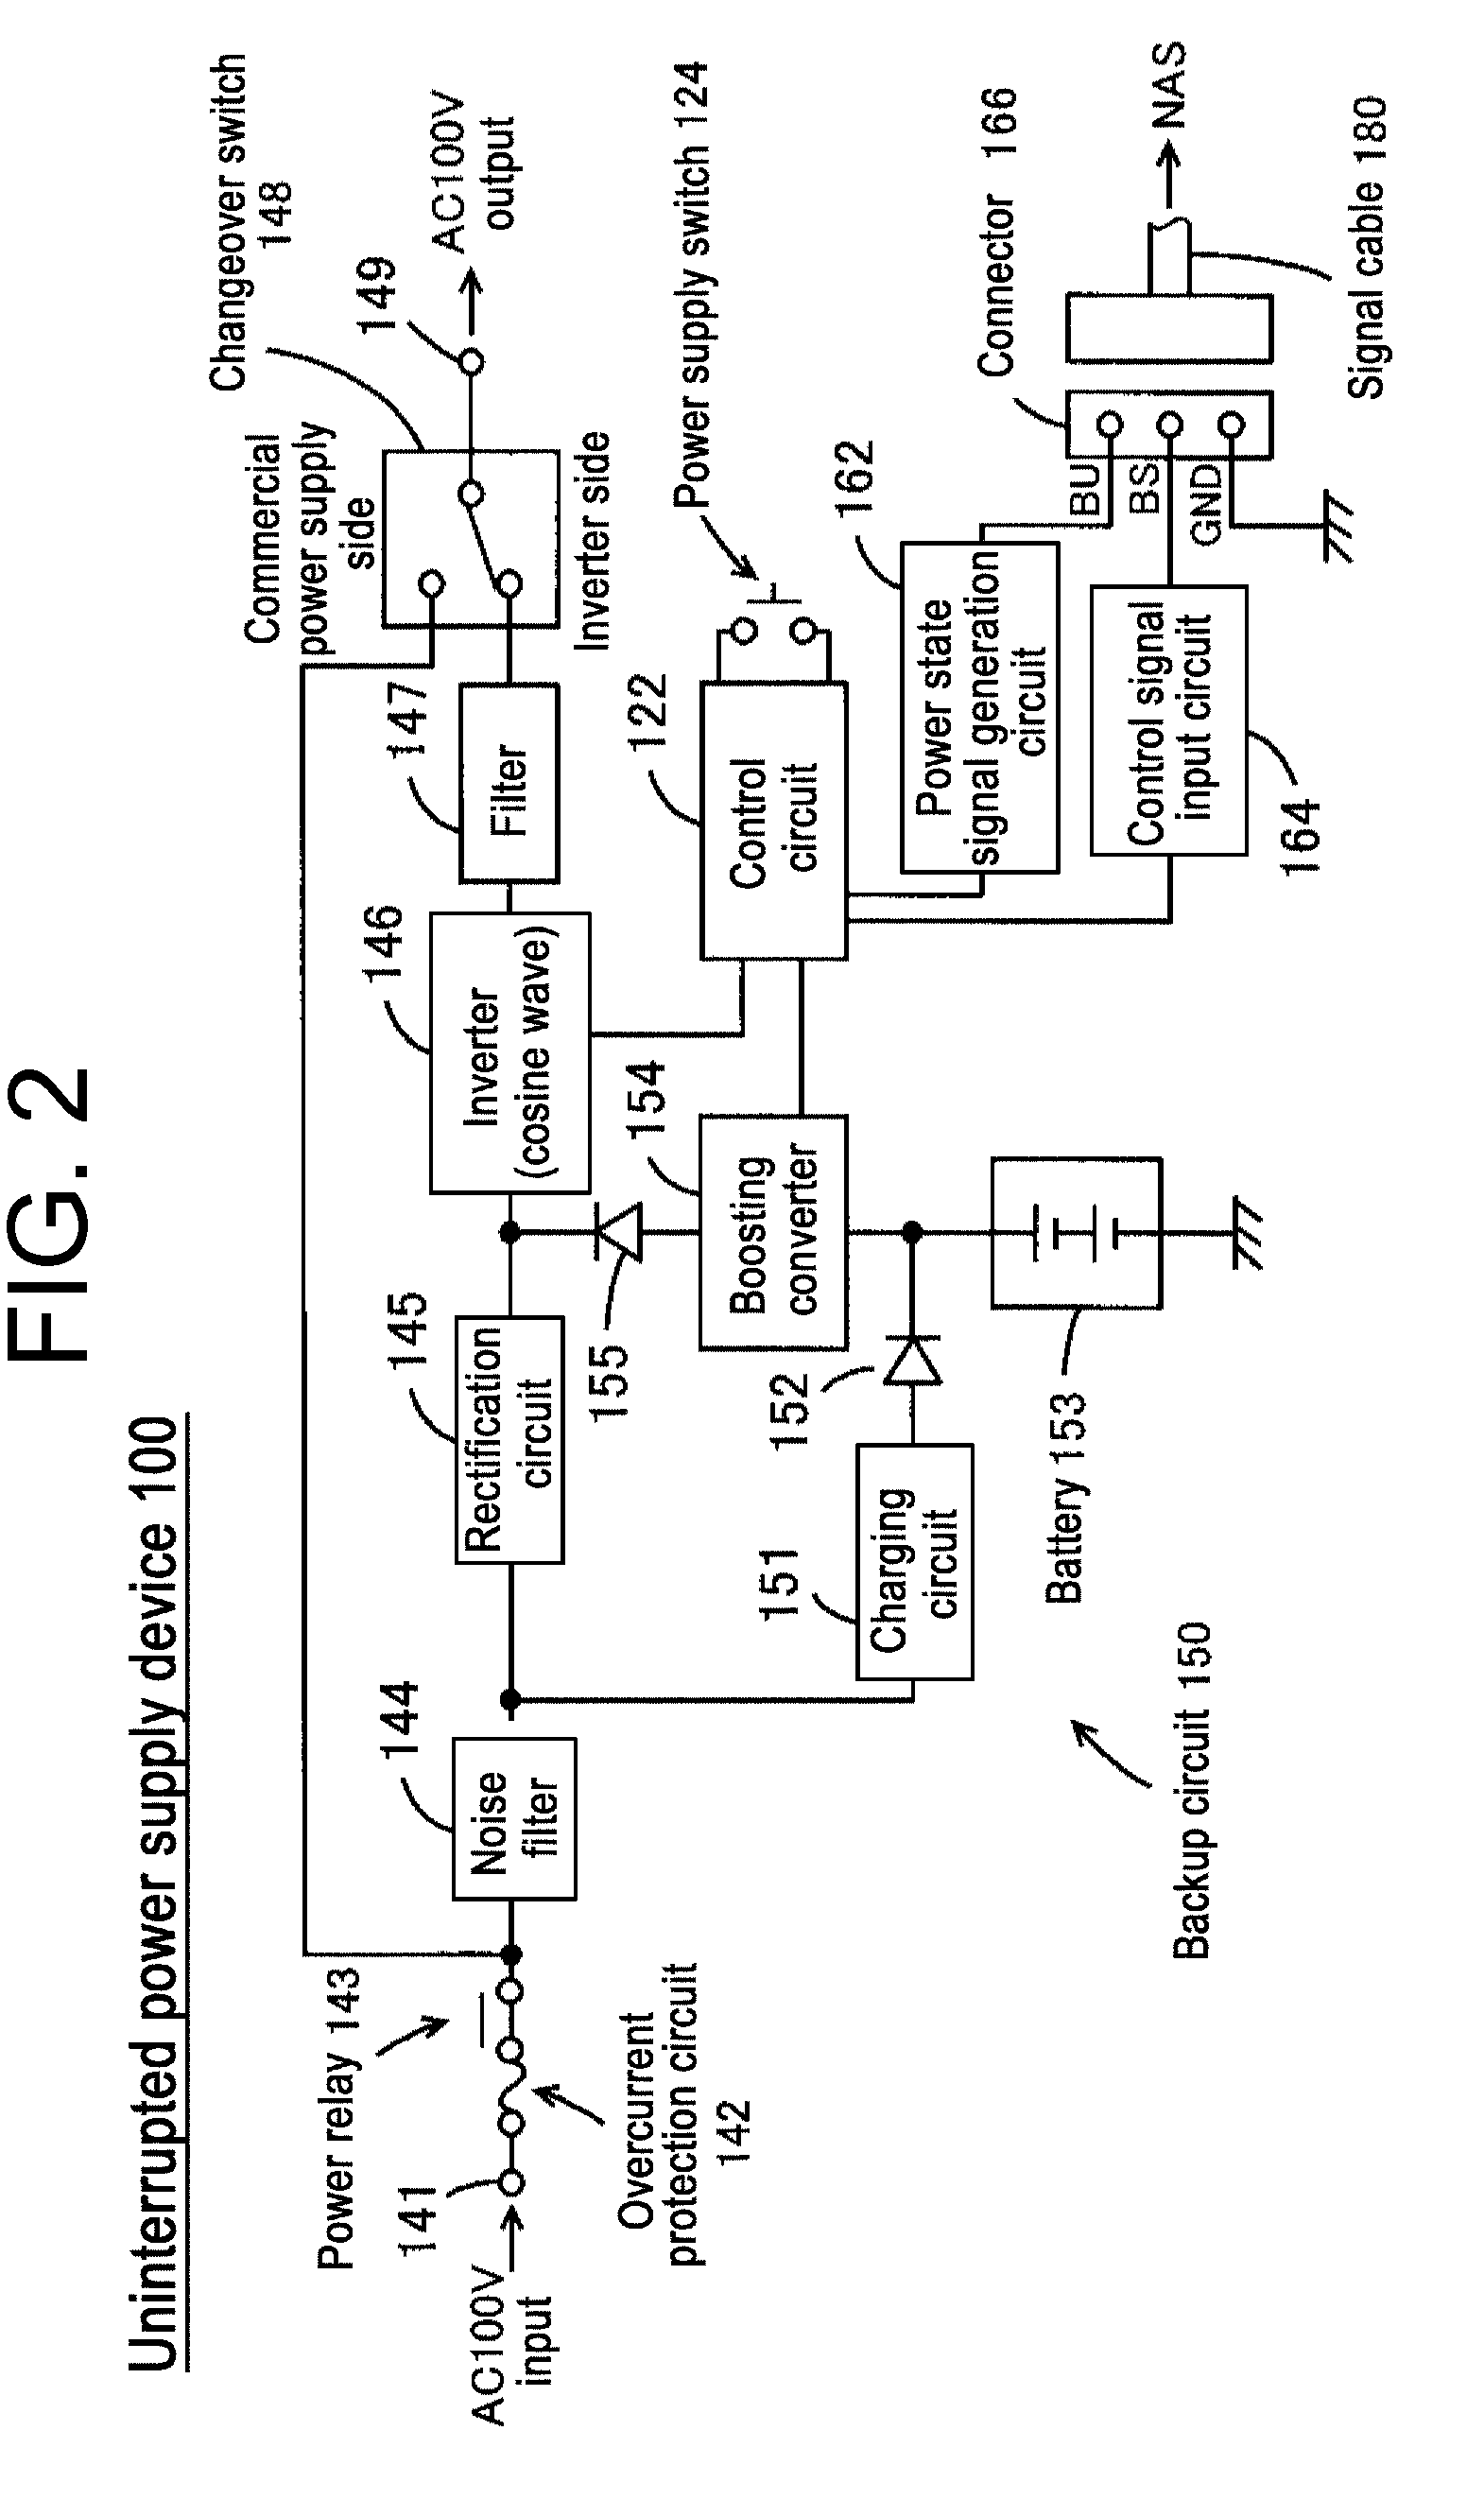 Storage power supply system, storage device, and control thereof